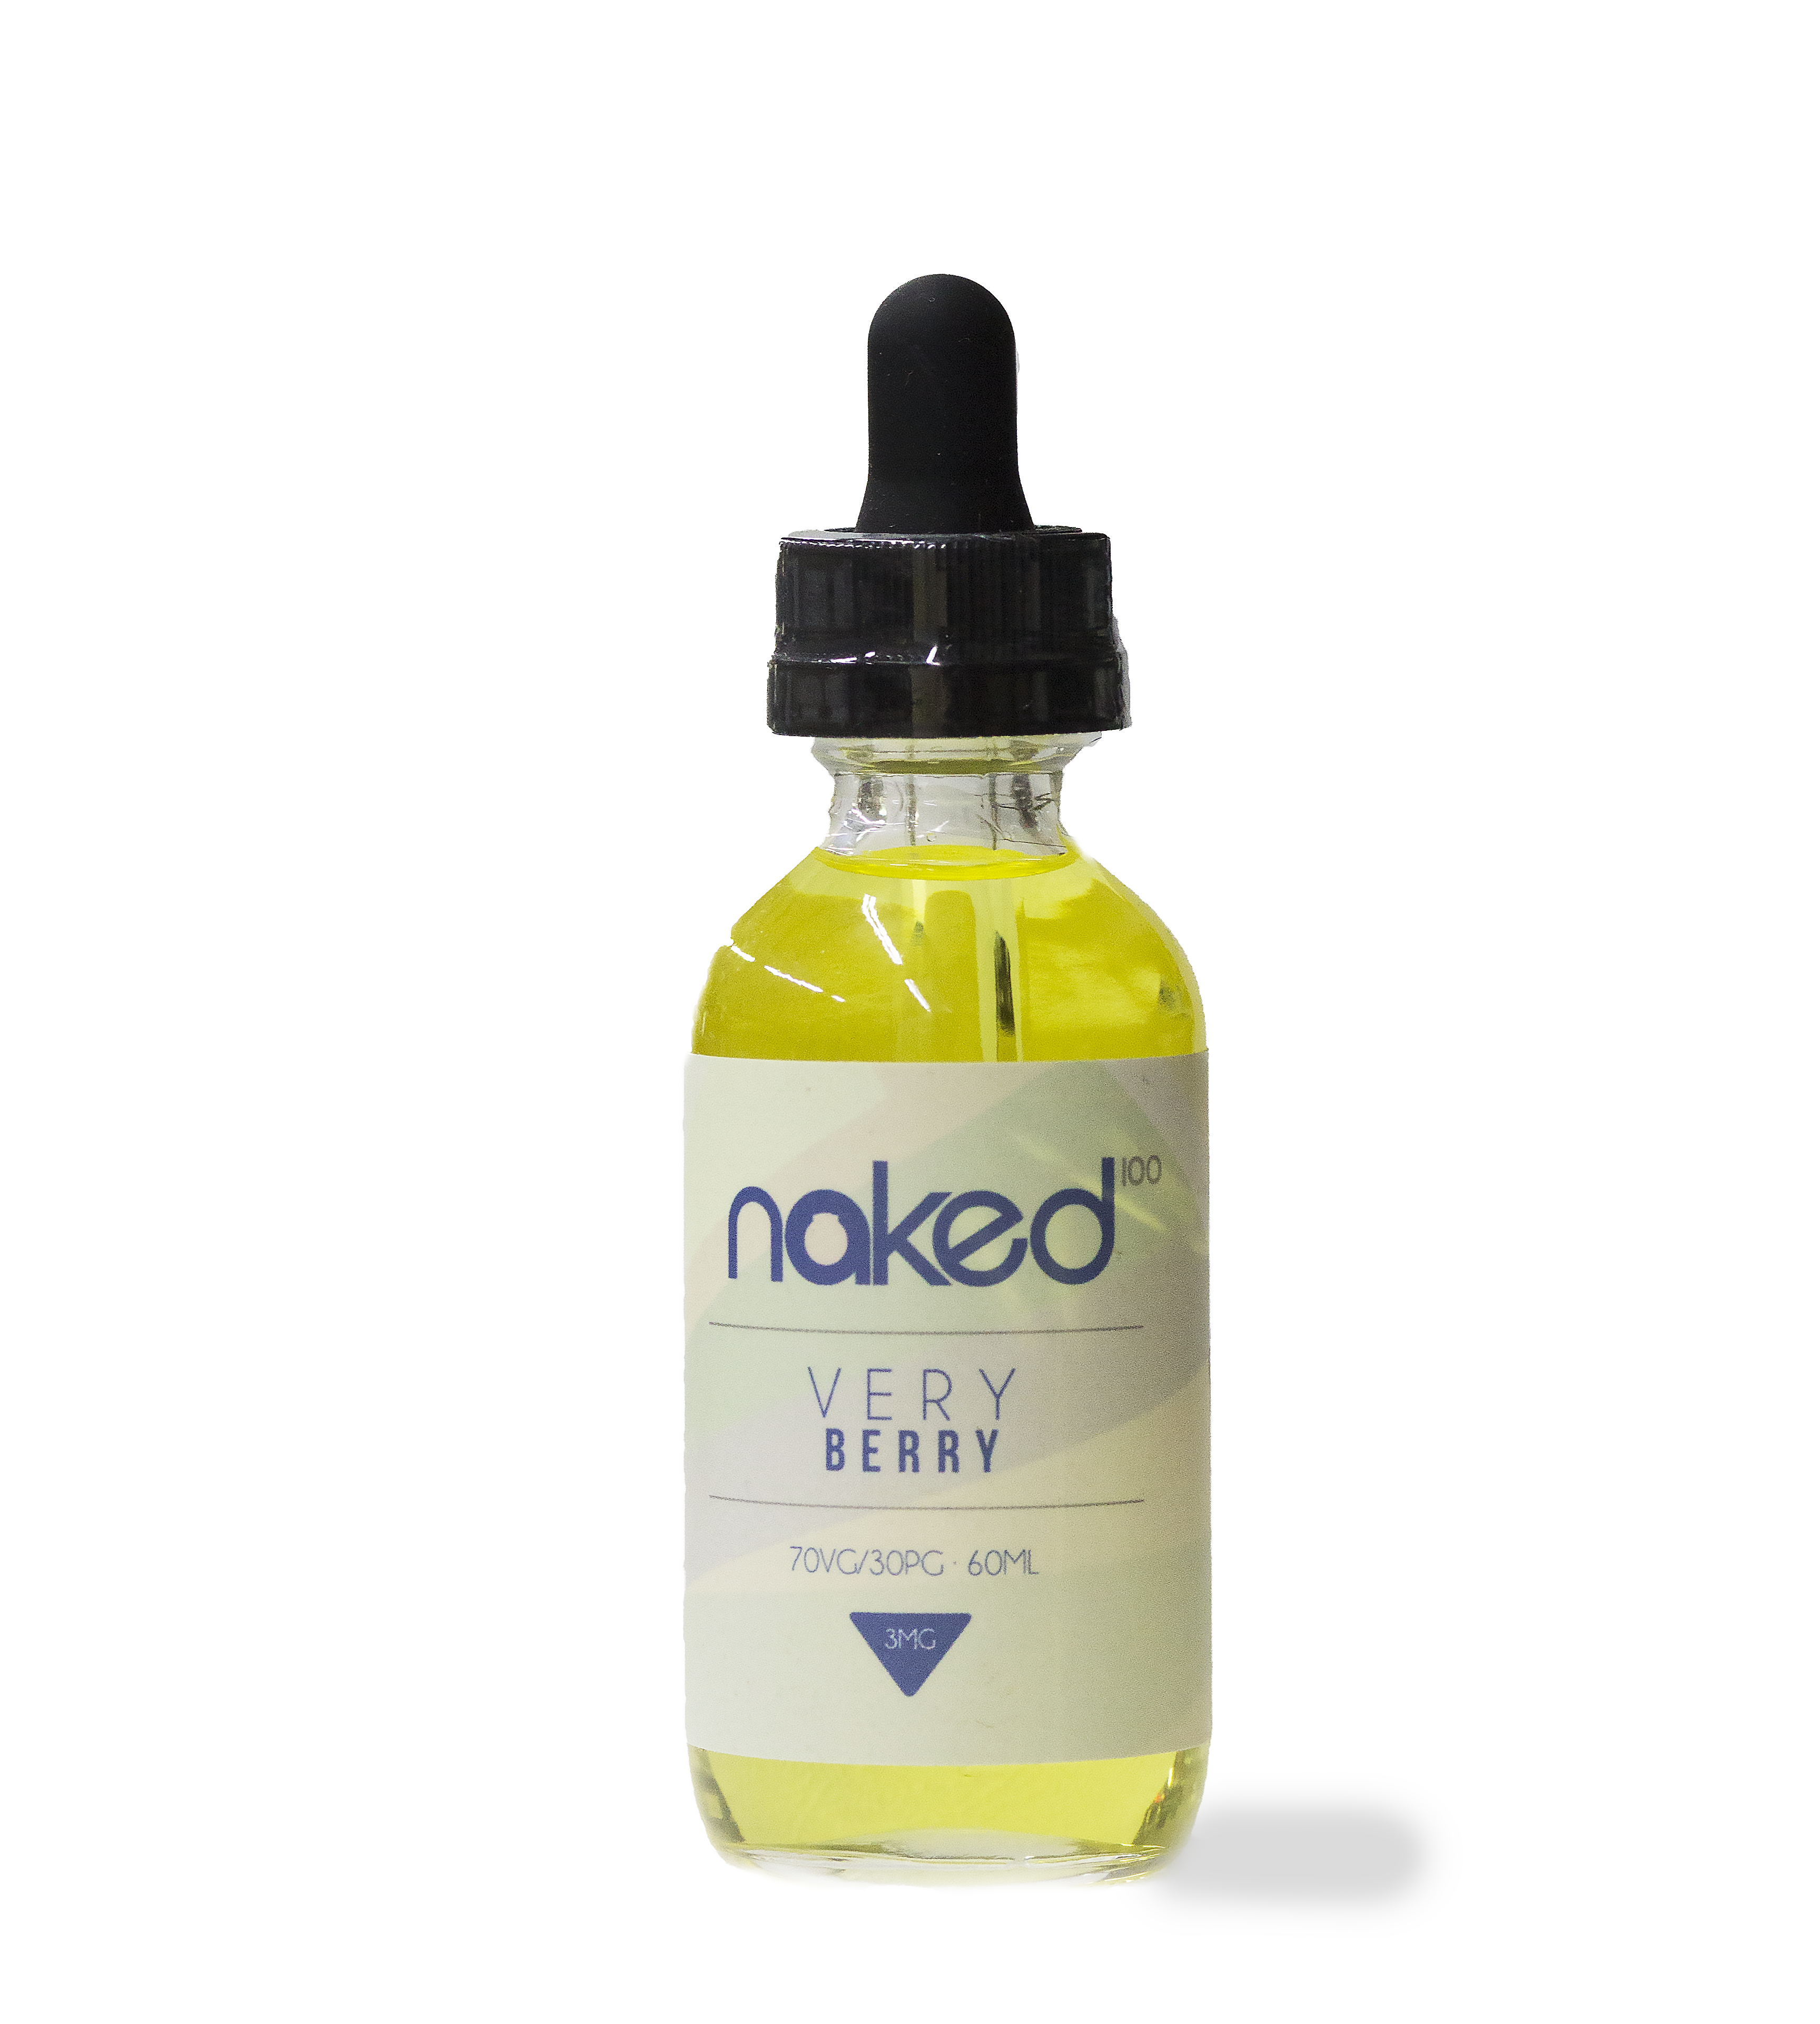 Get Your eJuice - Naked Very Berry